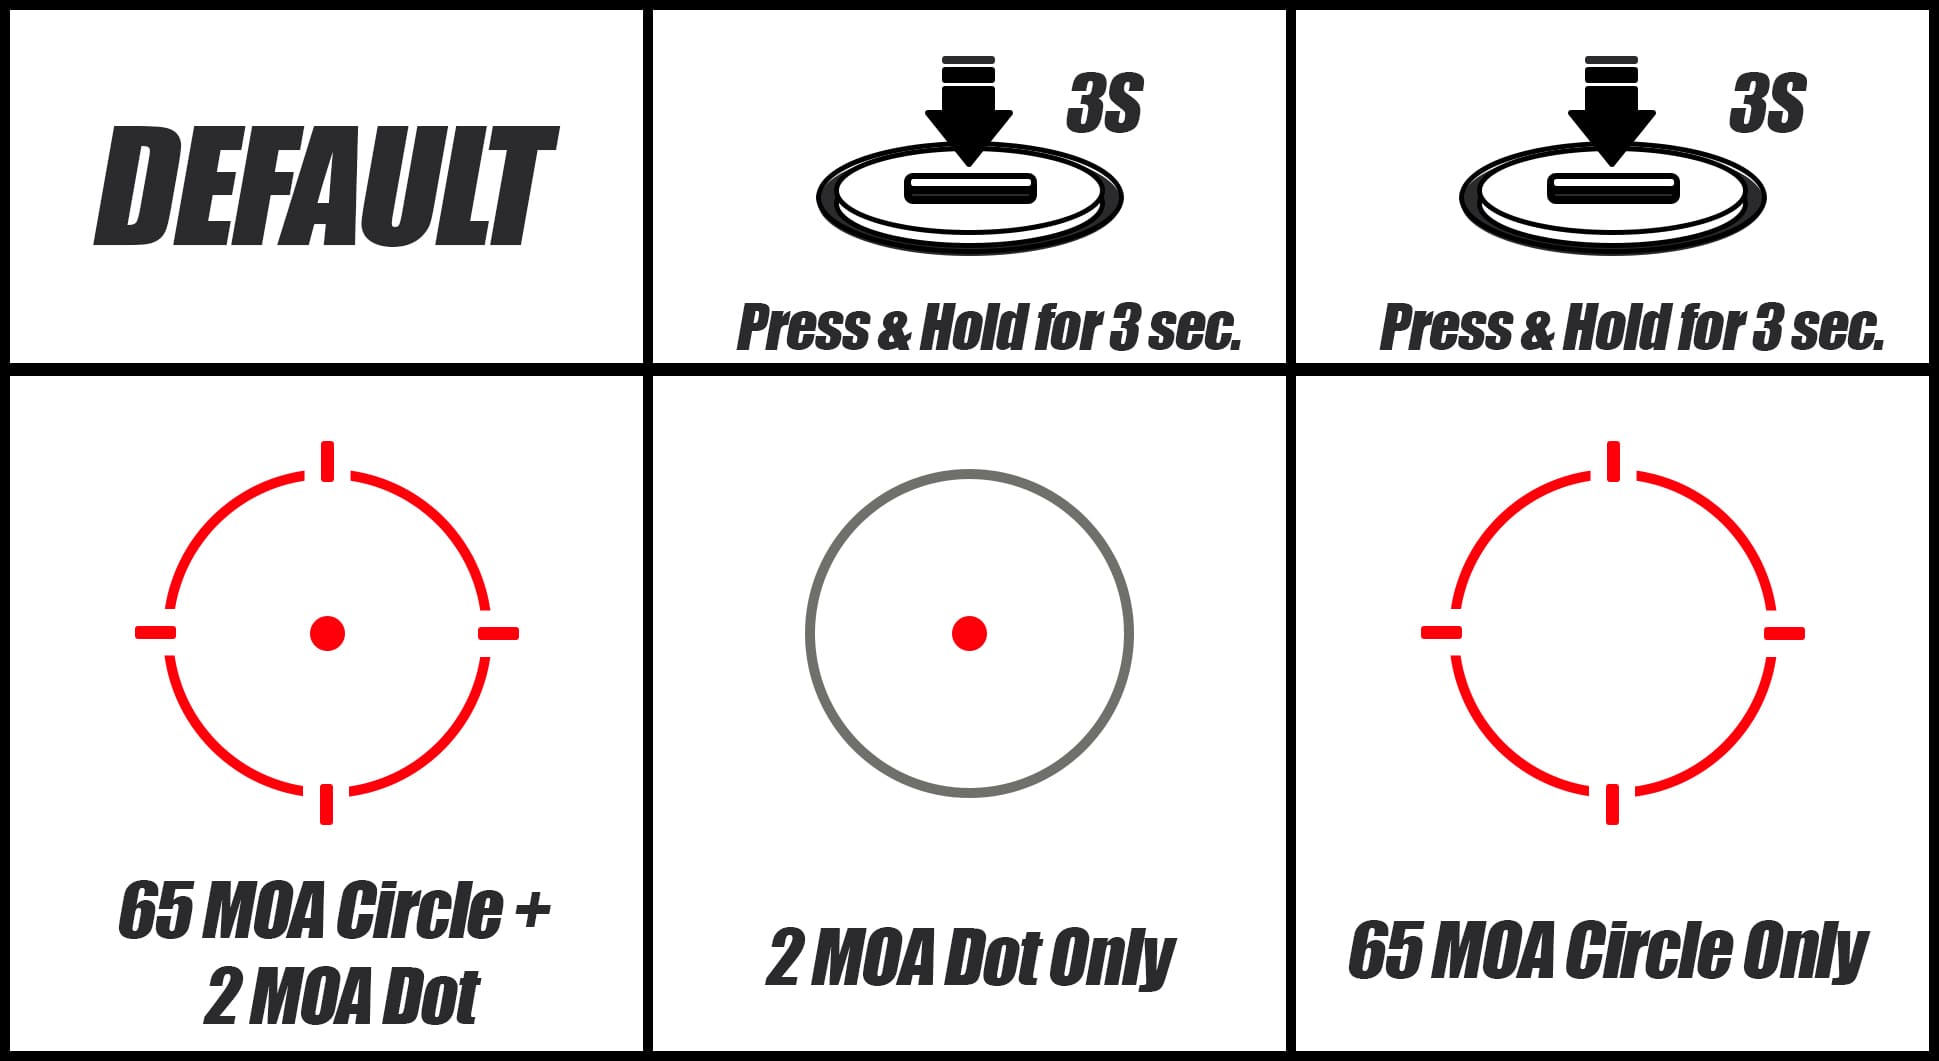 Holosun 510C MRS Reticle Toggle - How to change reticles - hold down the minus button for 3 seconds